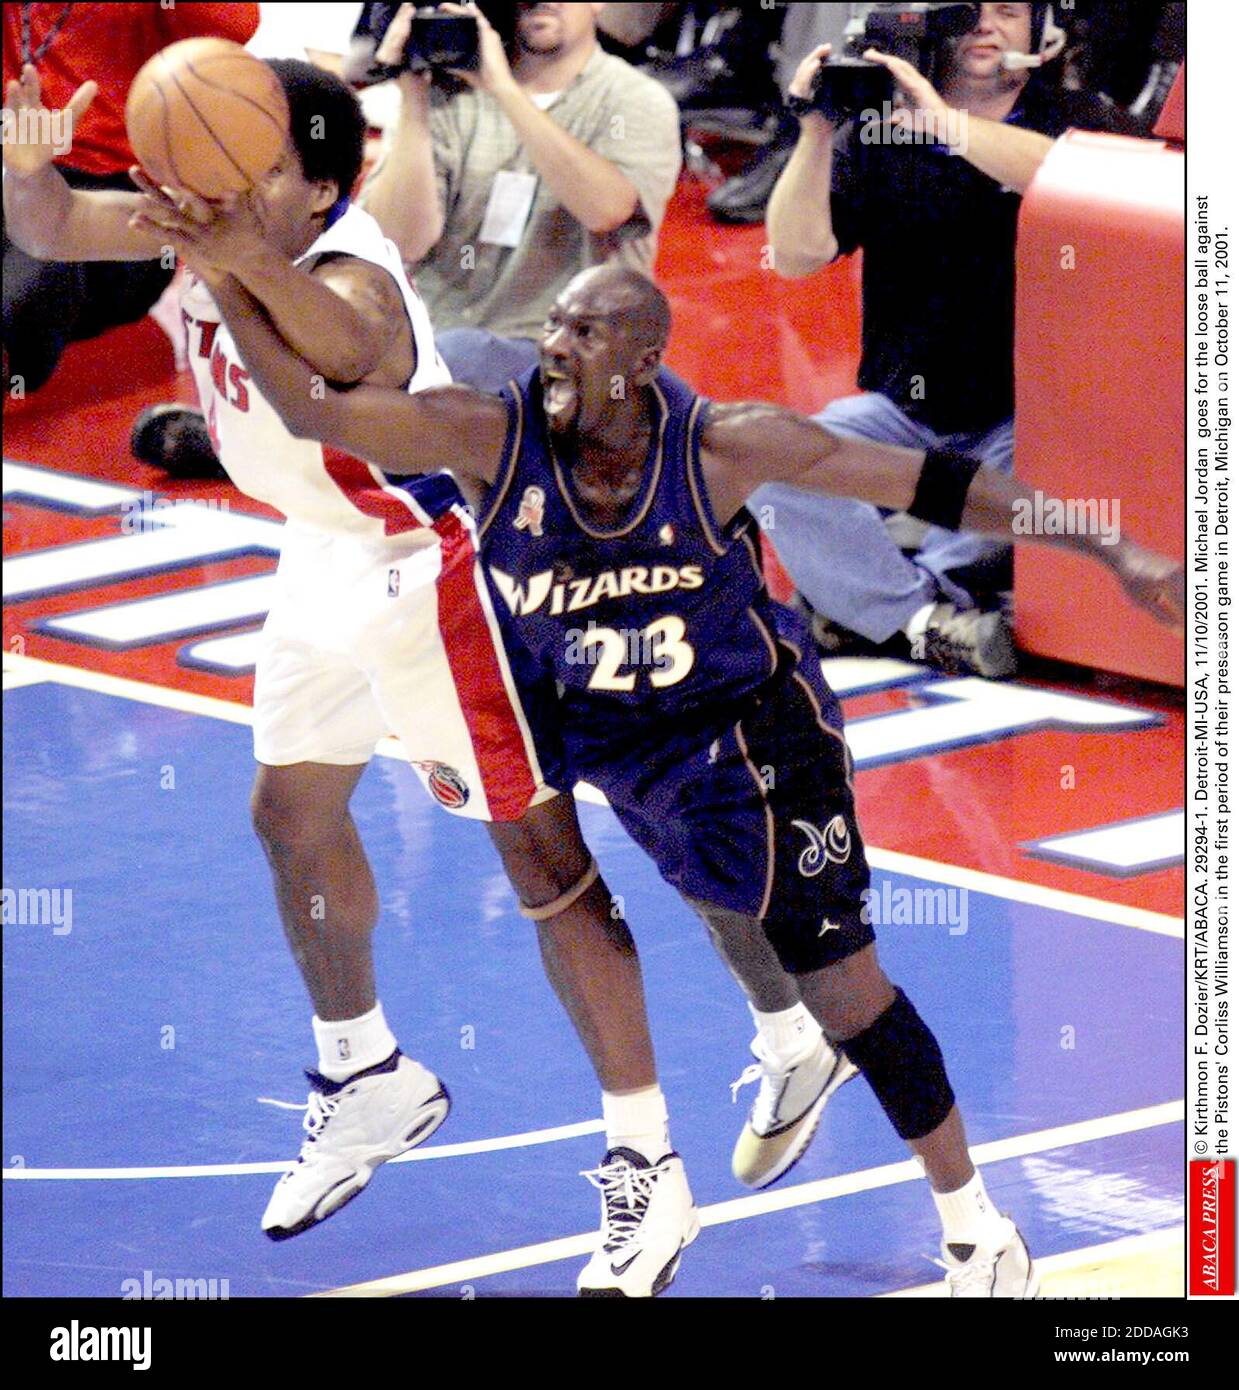 Washington Wizards' Michael Jordan goes for the basket during a preseason  game against the New Jersey Nets Tuesday, Oct. 23, 2001, at the Bi-Lo  Center in Greenville, SC. (AP Photo/Mary Ann Chastain